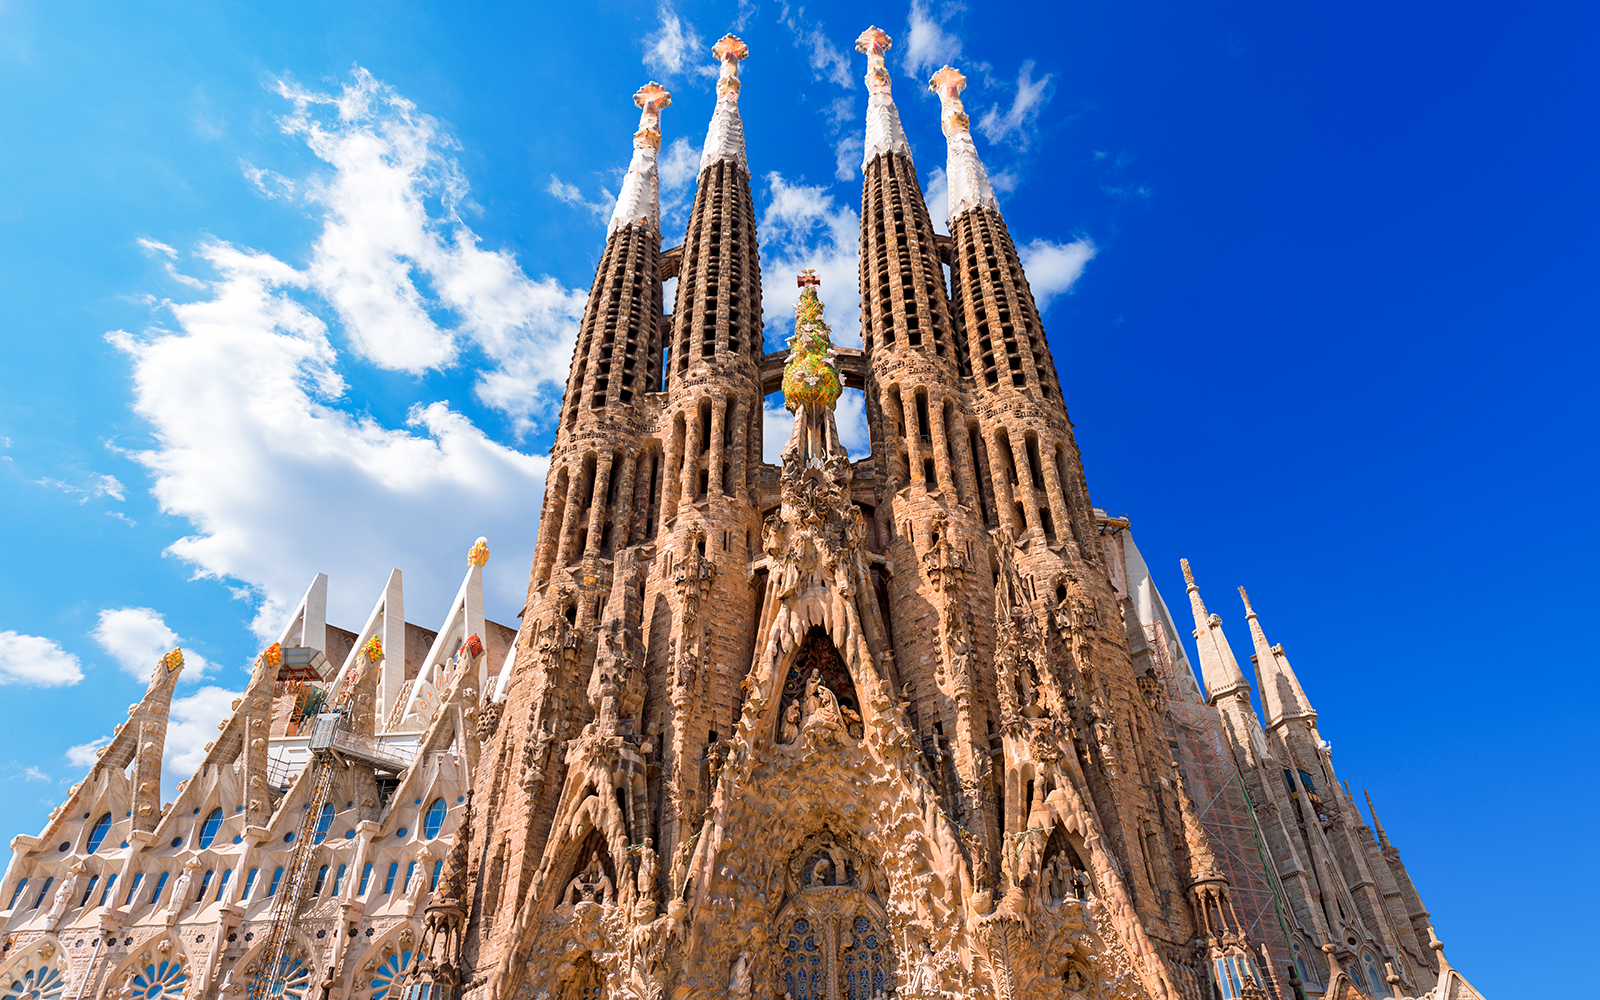 Image of Best of Gaudí: Park Guell and La Sagrada Familia Guided Tour